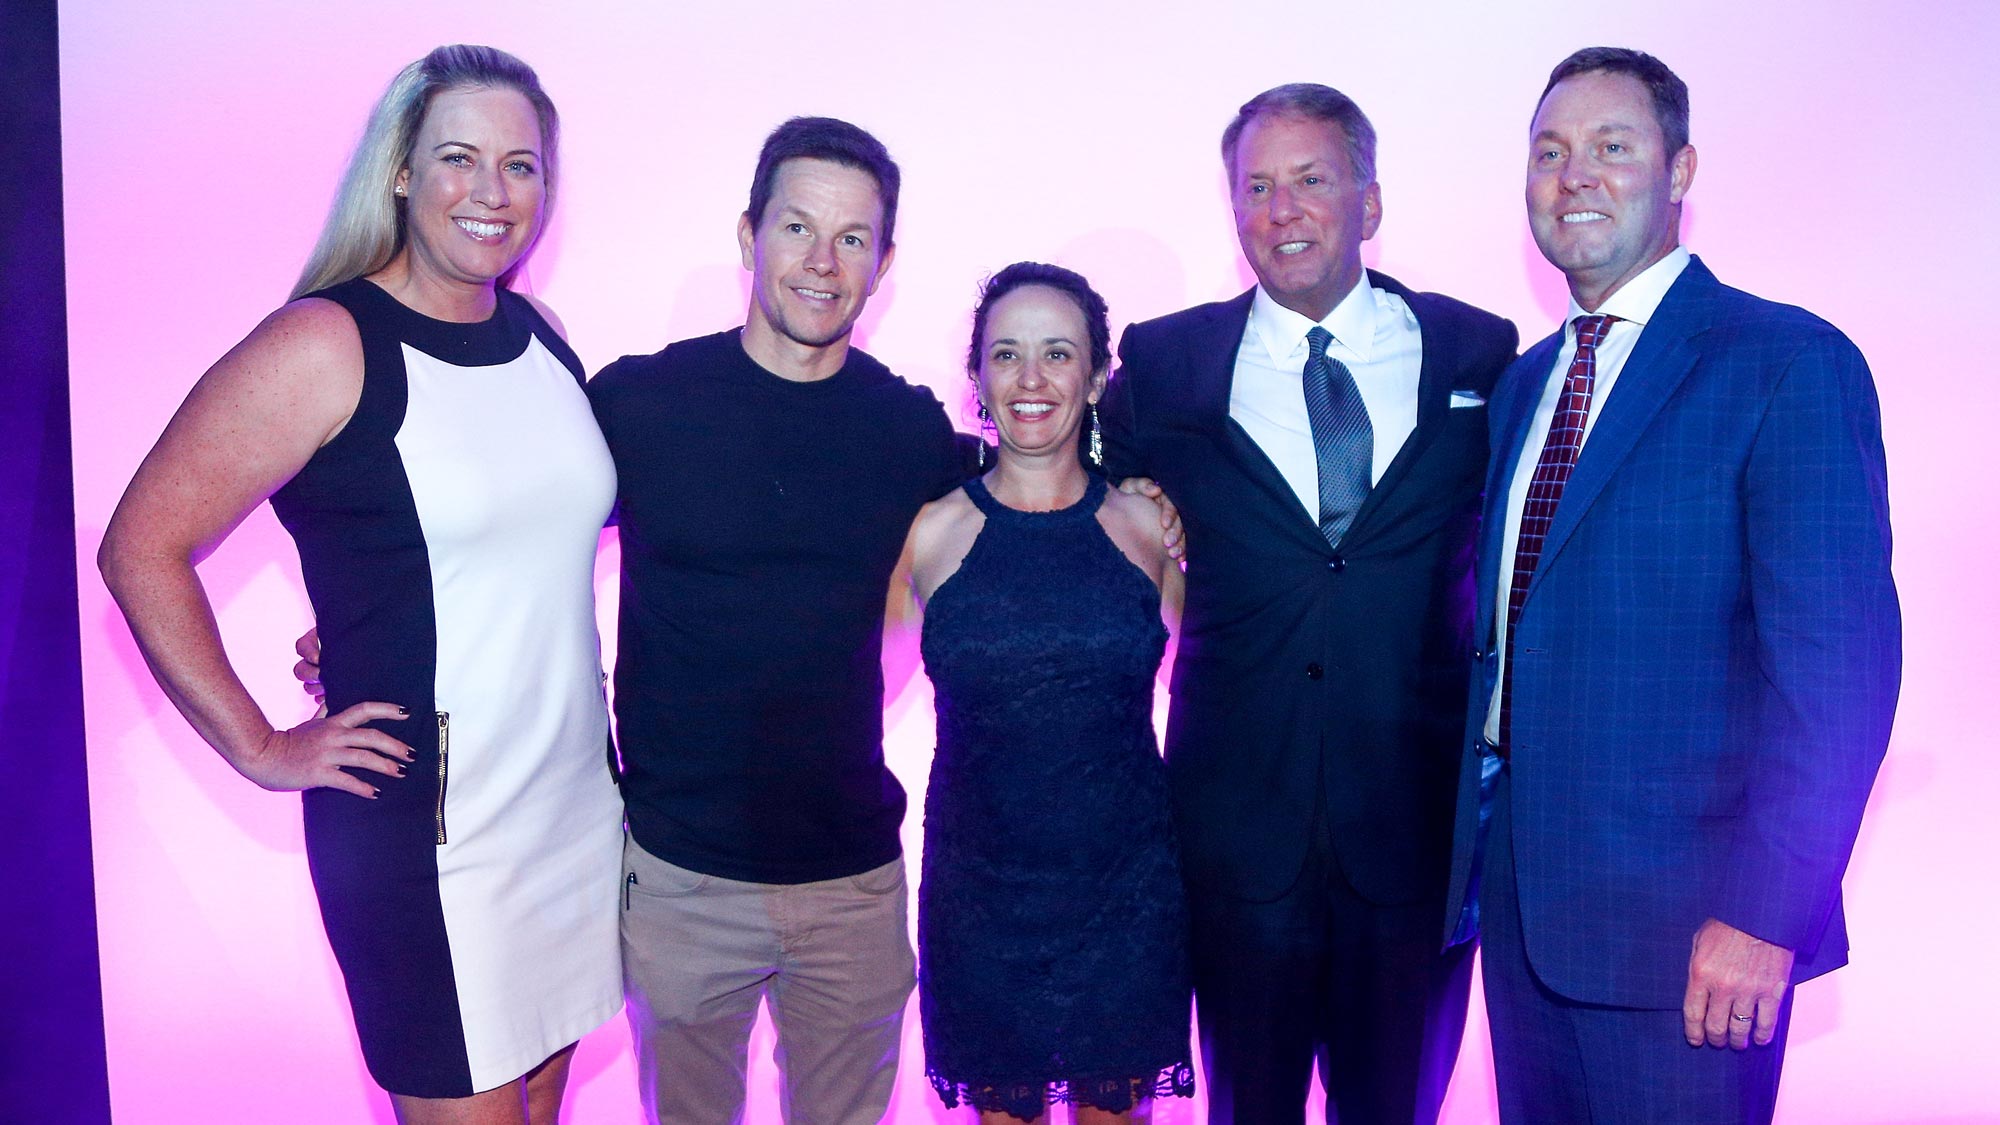 (left to right) LPGA golfer Brittany Lincicome, Actor Mark Wahlberg, LPGA golfer Mo Martin, CME Group Chairman and CEO Terry Duffy and LPGA commissioner Michael Whan pose for a photo after changes for the 2019 LPGA CME Group Tour Championship were announced at the Ritz Carlton Hotel 